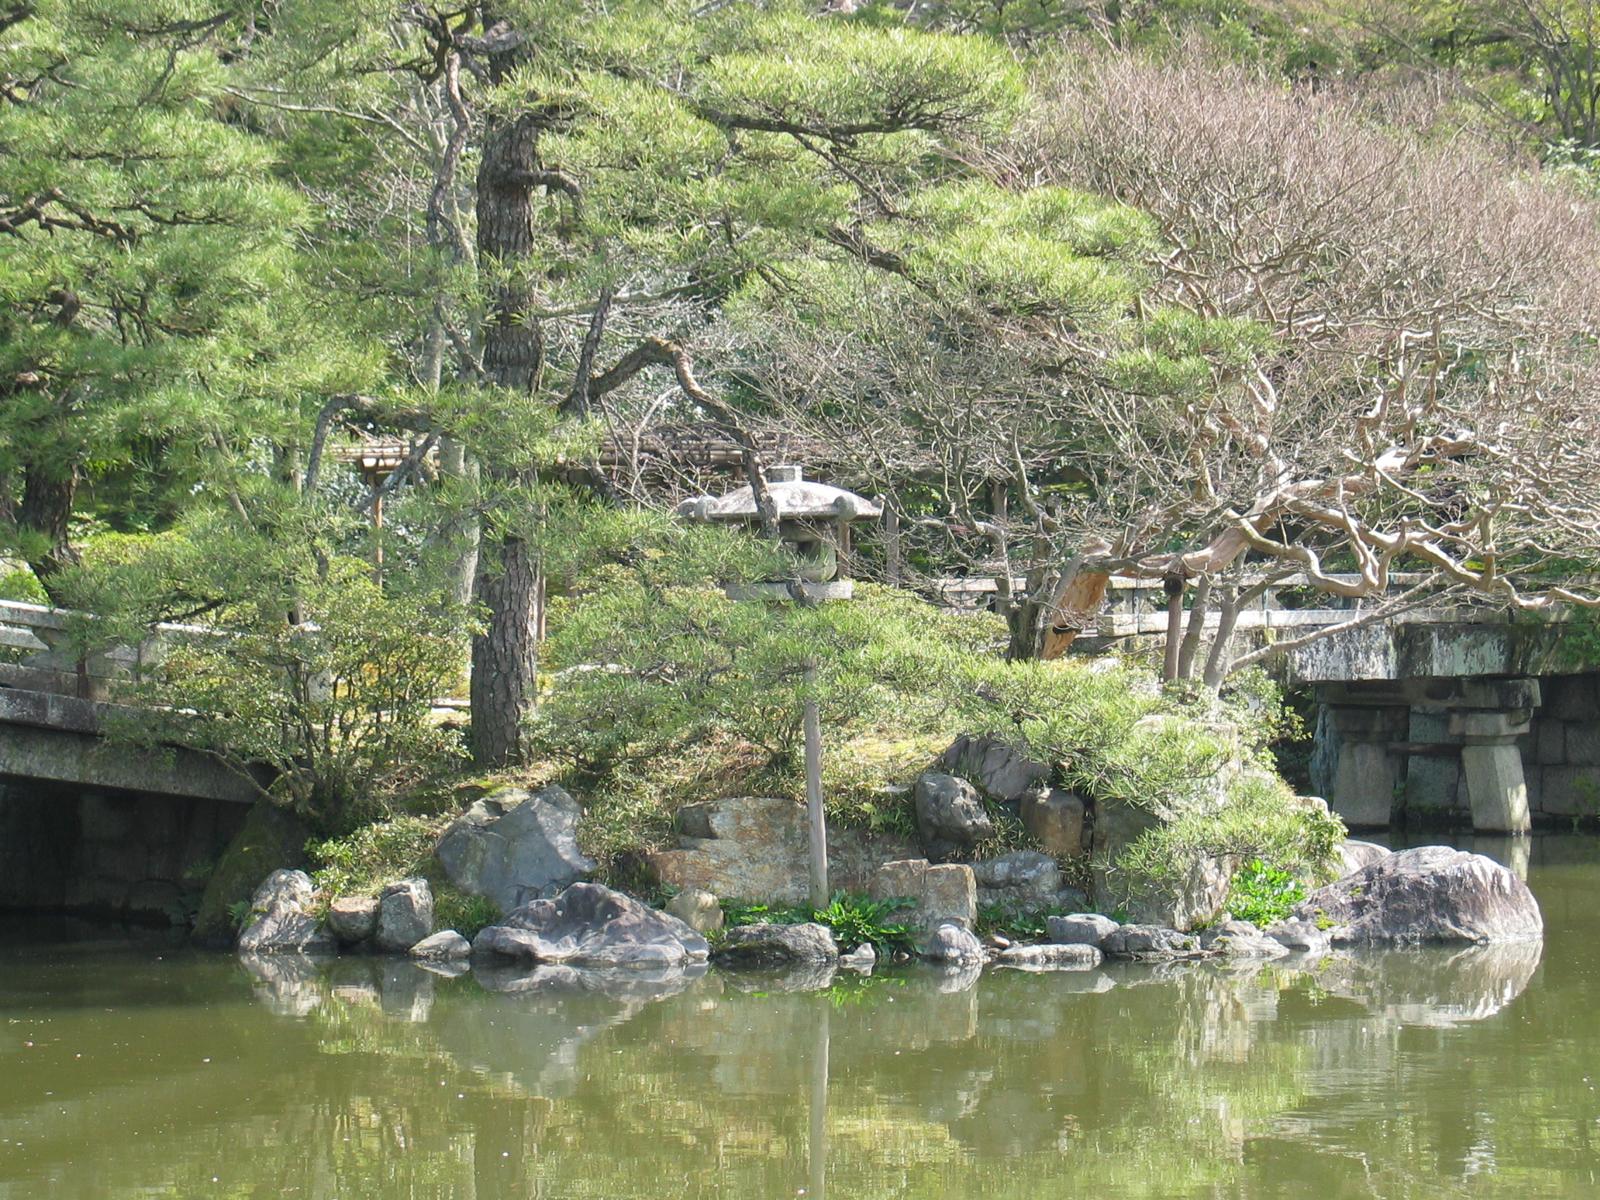 The Imperial Palace in Kyoto